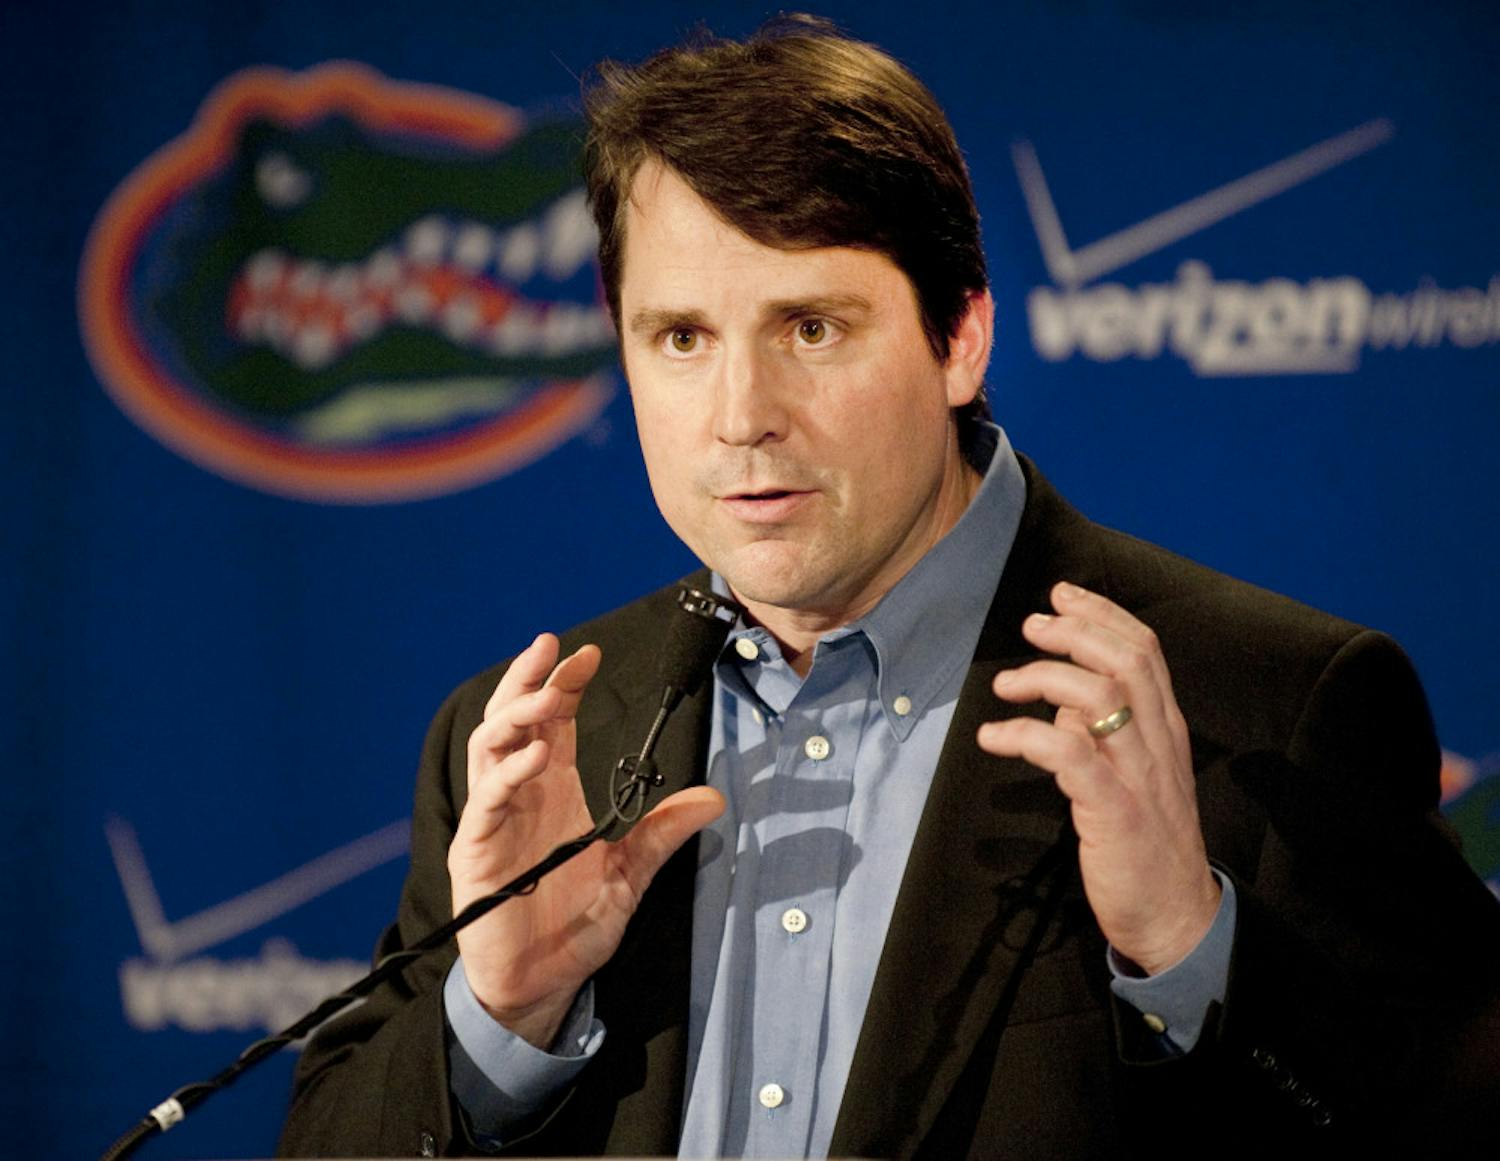 Florida football coach Will Muschamp discusses recruits on National Signing Day and fields questions from the media during a press conference held inside Ben Hill Griffin Stadium on Wednesday.